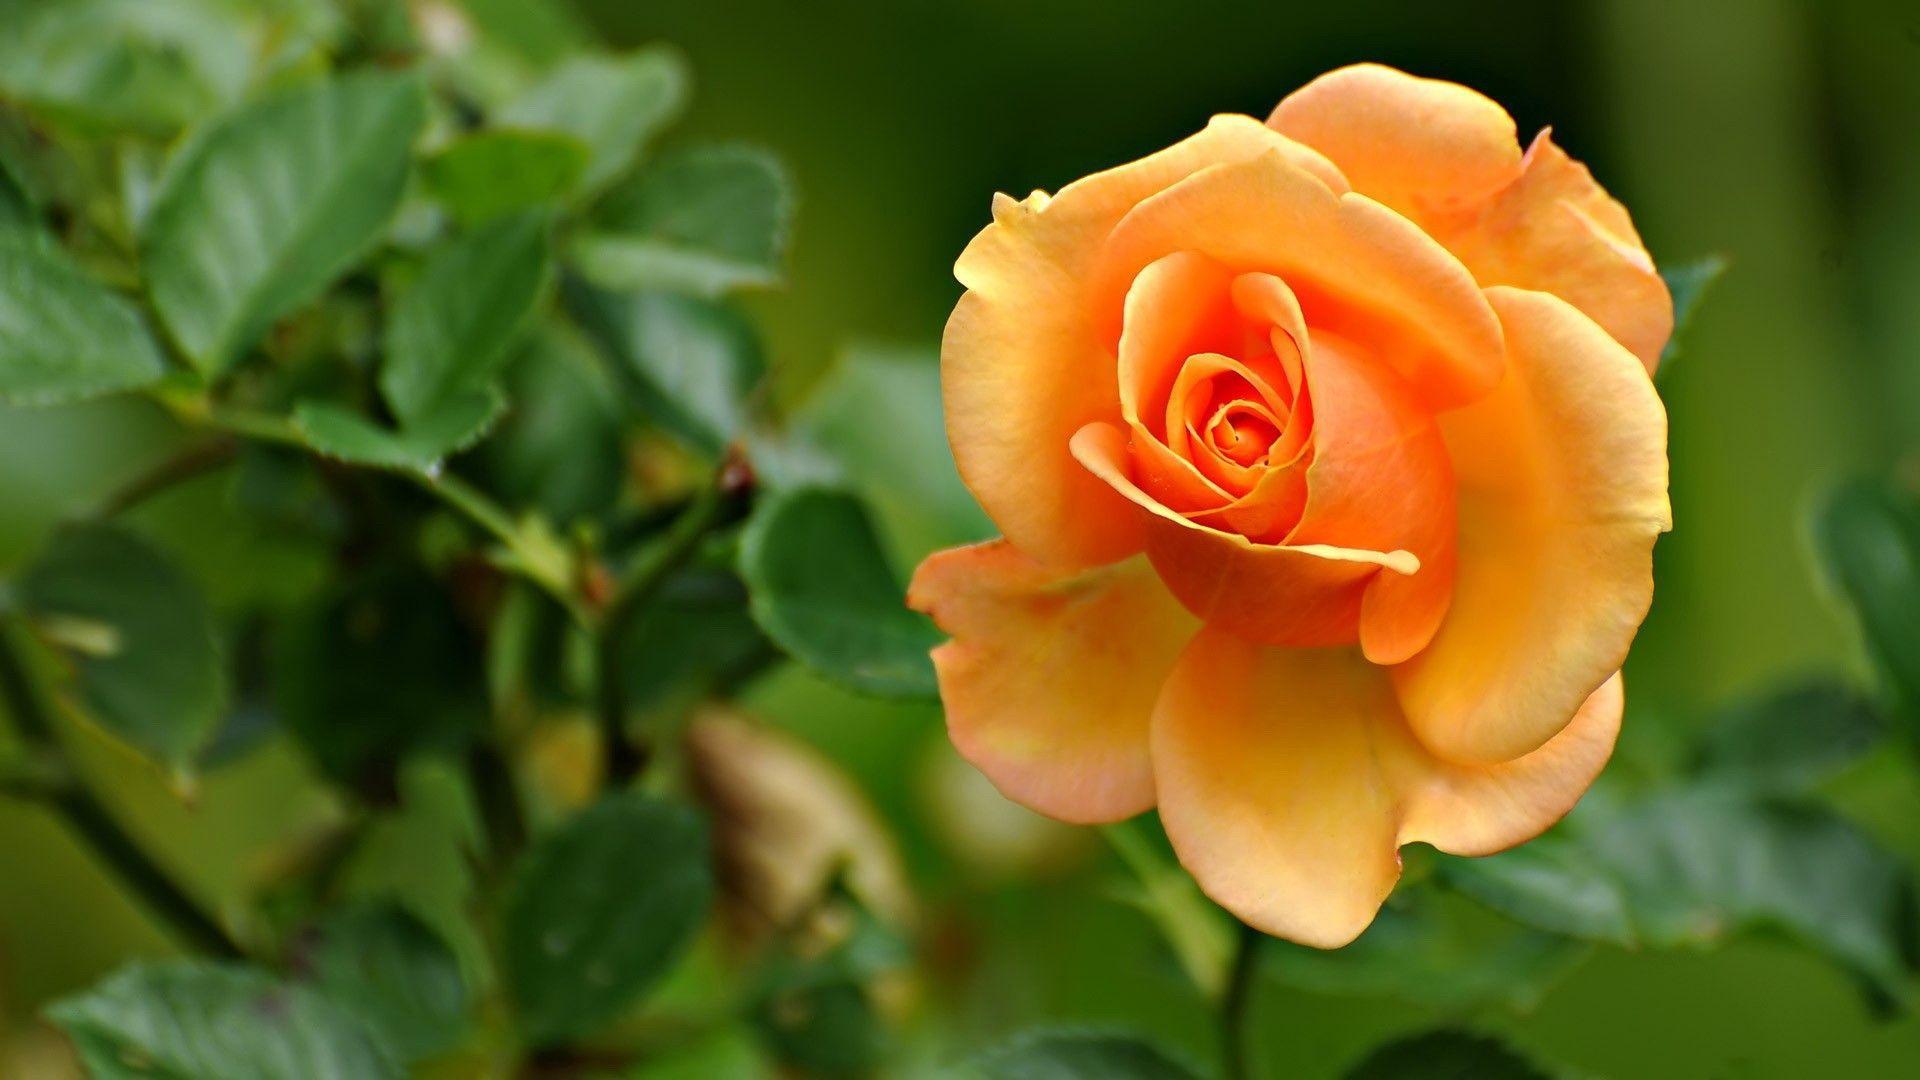 Yellow orange roses wallpaper and image, picture, photo